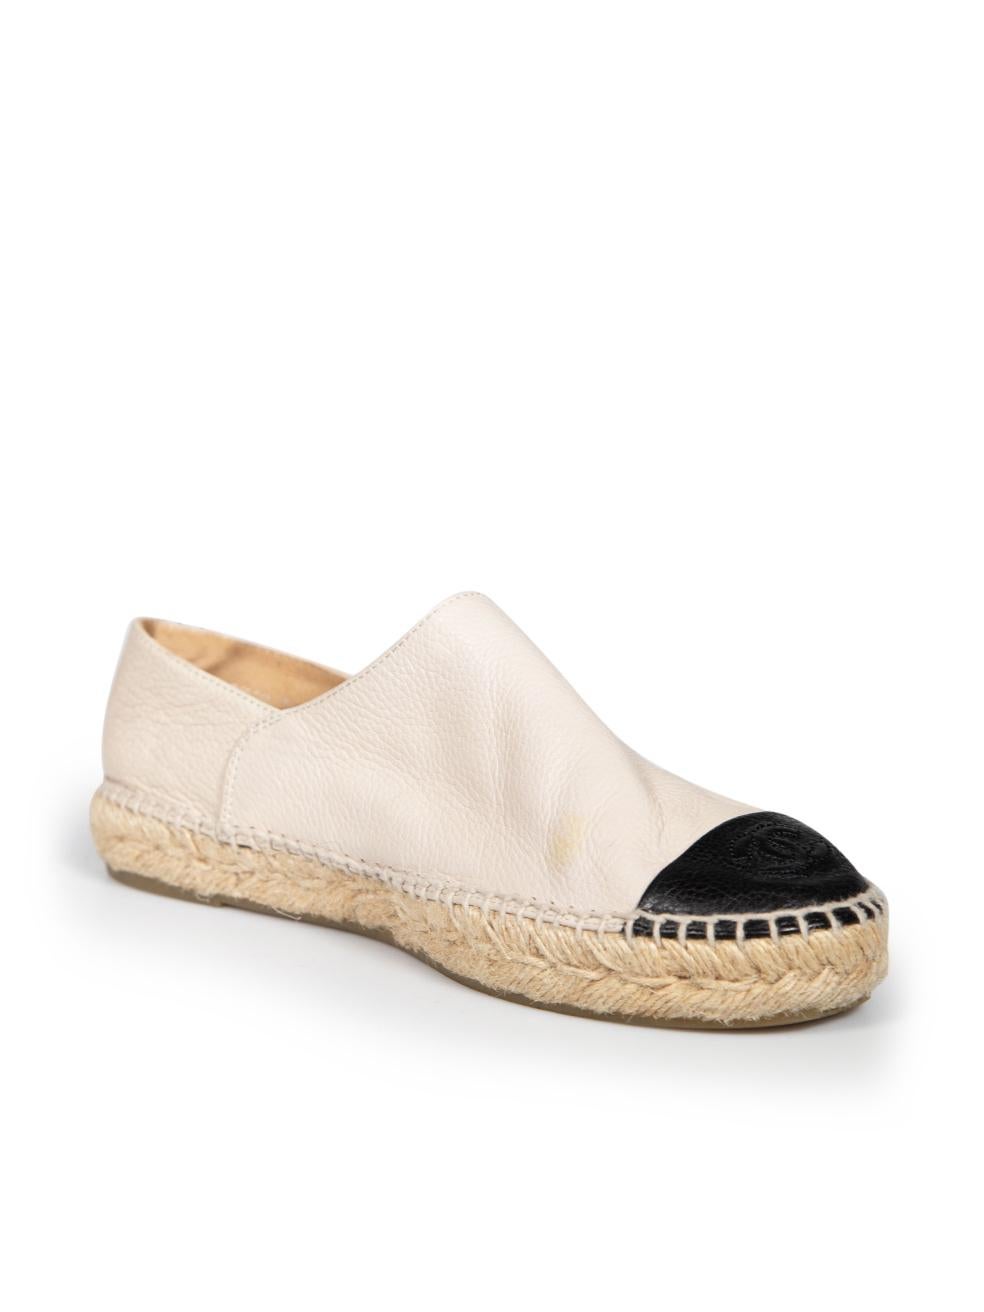 CONDITION is Good. Minor wear to espadrilles is evident. Light discoloured marks to uppers of both shoes on this used Chanel designer resale item.
 
 
 
 Details
 
 
 Beige
 
 Leather
 
 Espadrilles
 
 Flat
 
 Round toe
 
 Jute sole
 
 Black leather